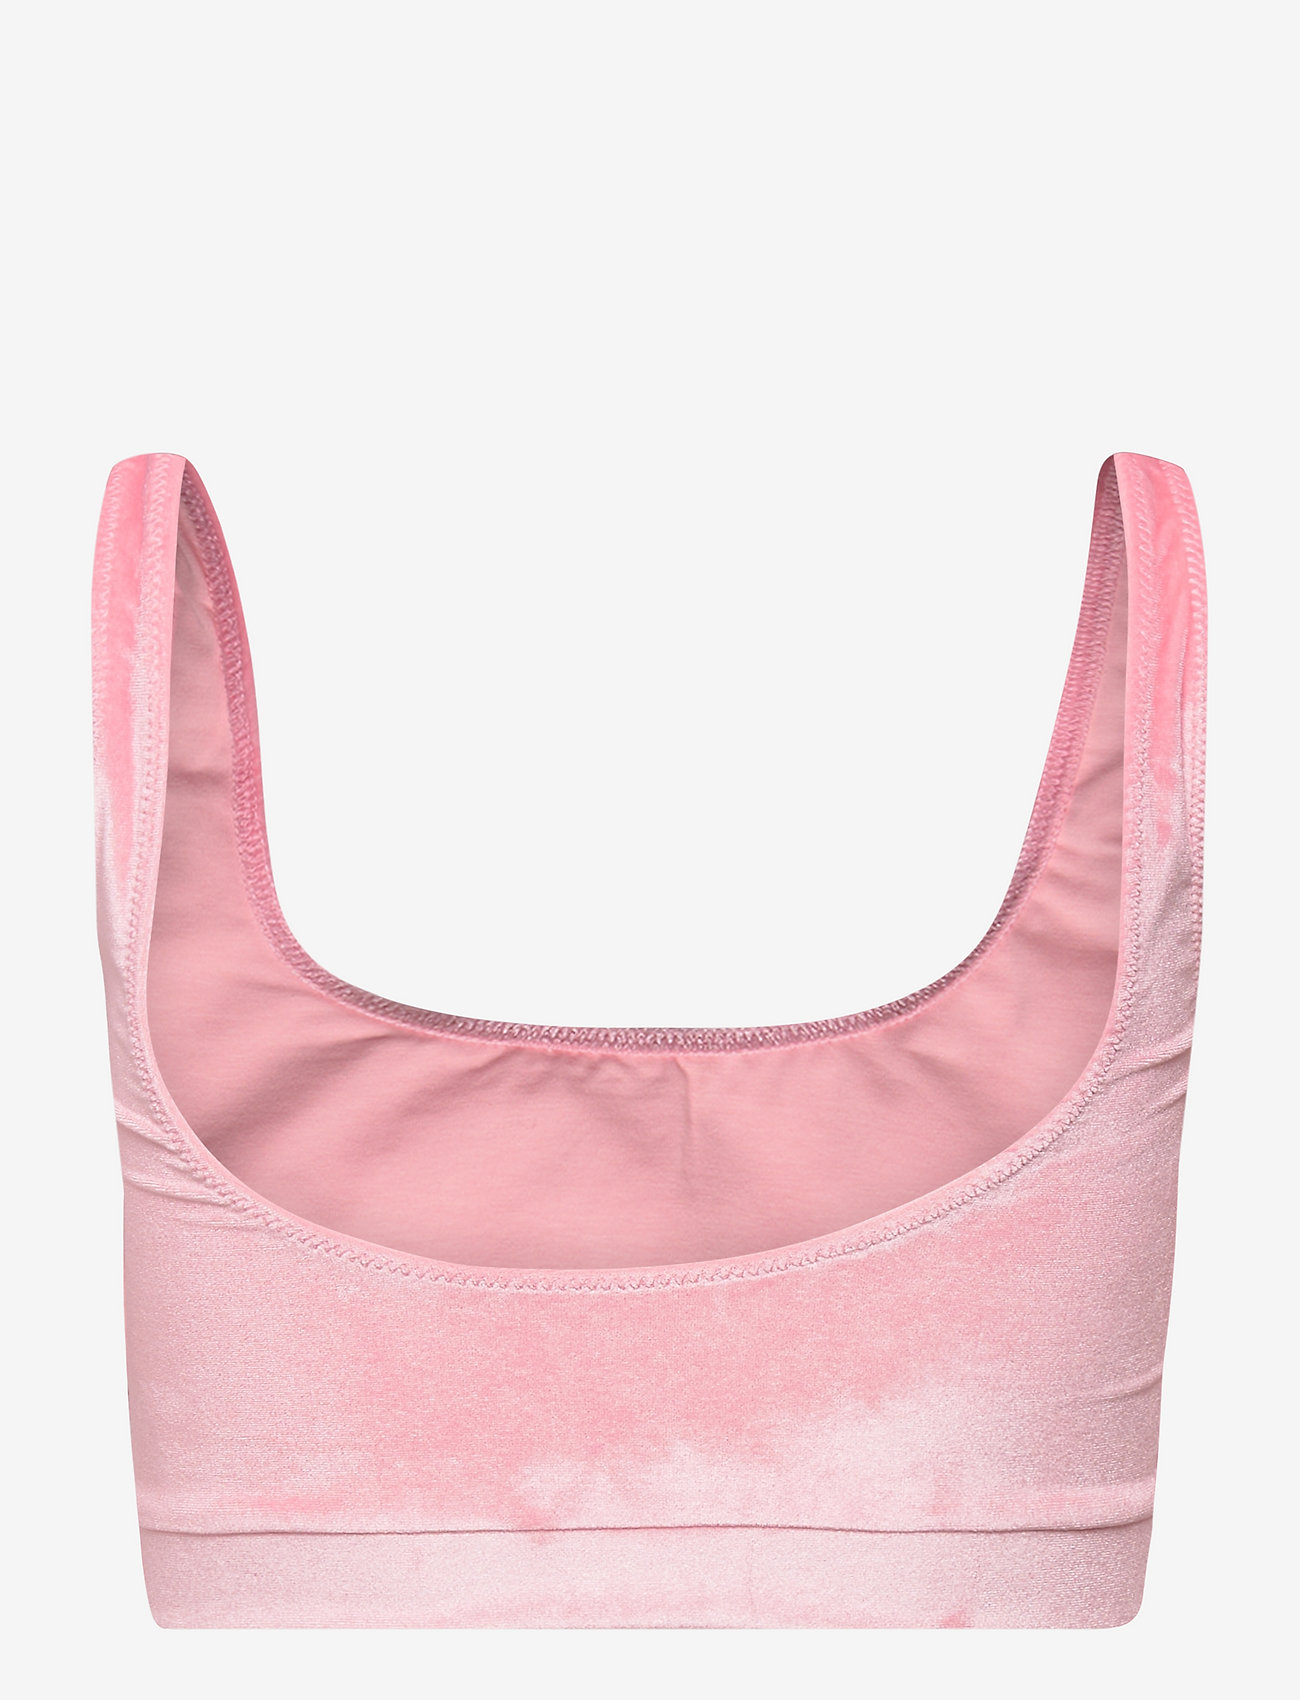 OW Collection - VENUS Top - toppiliivit - strawberry - 1